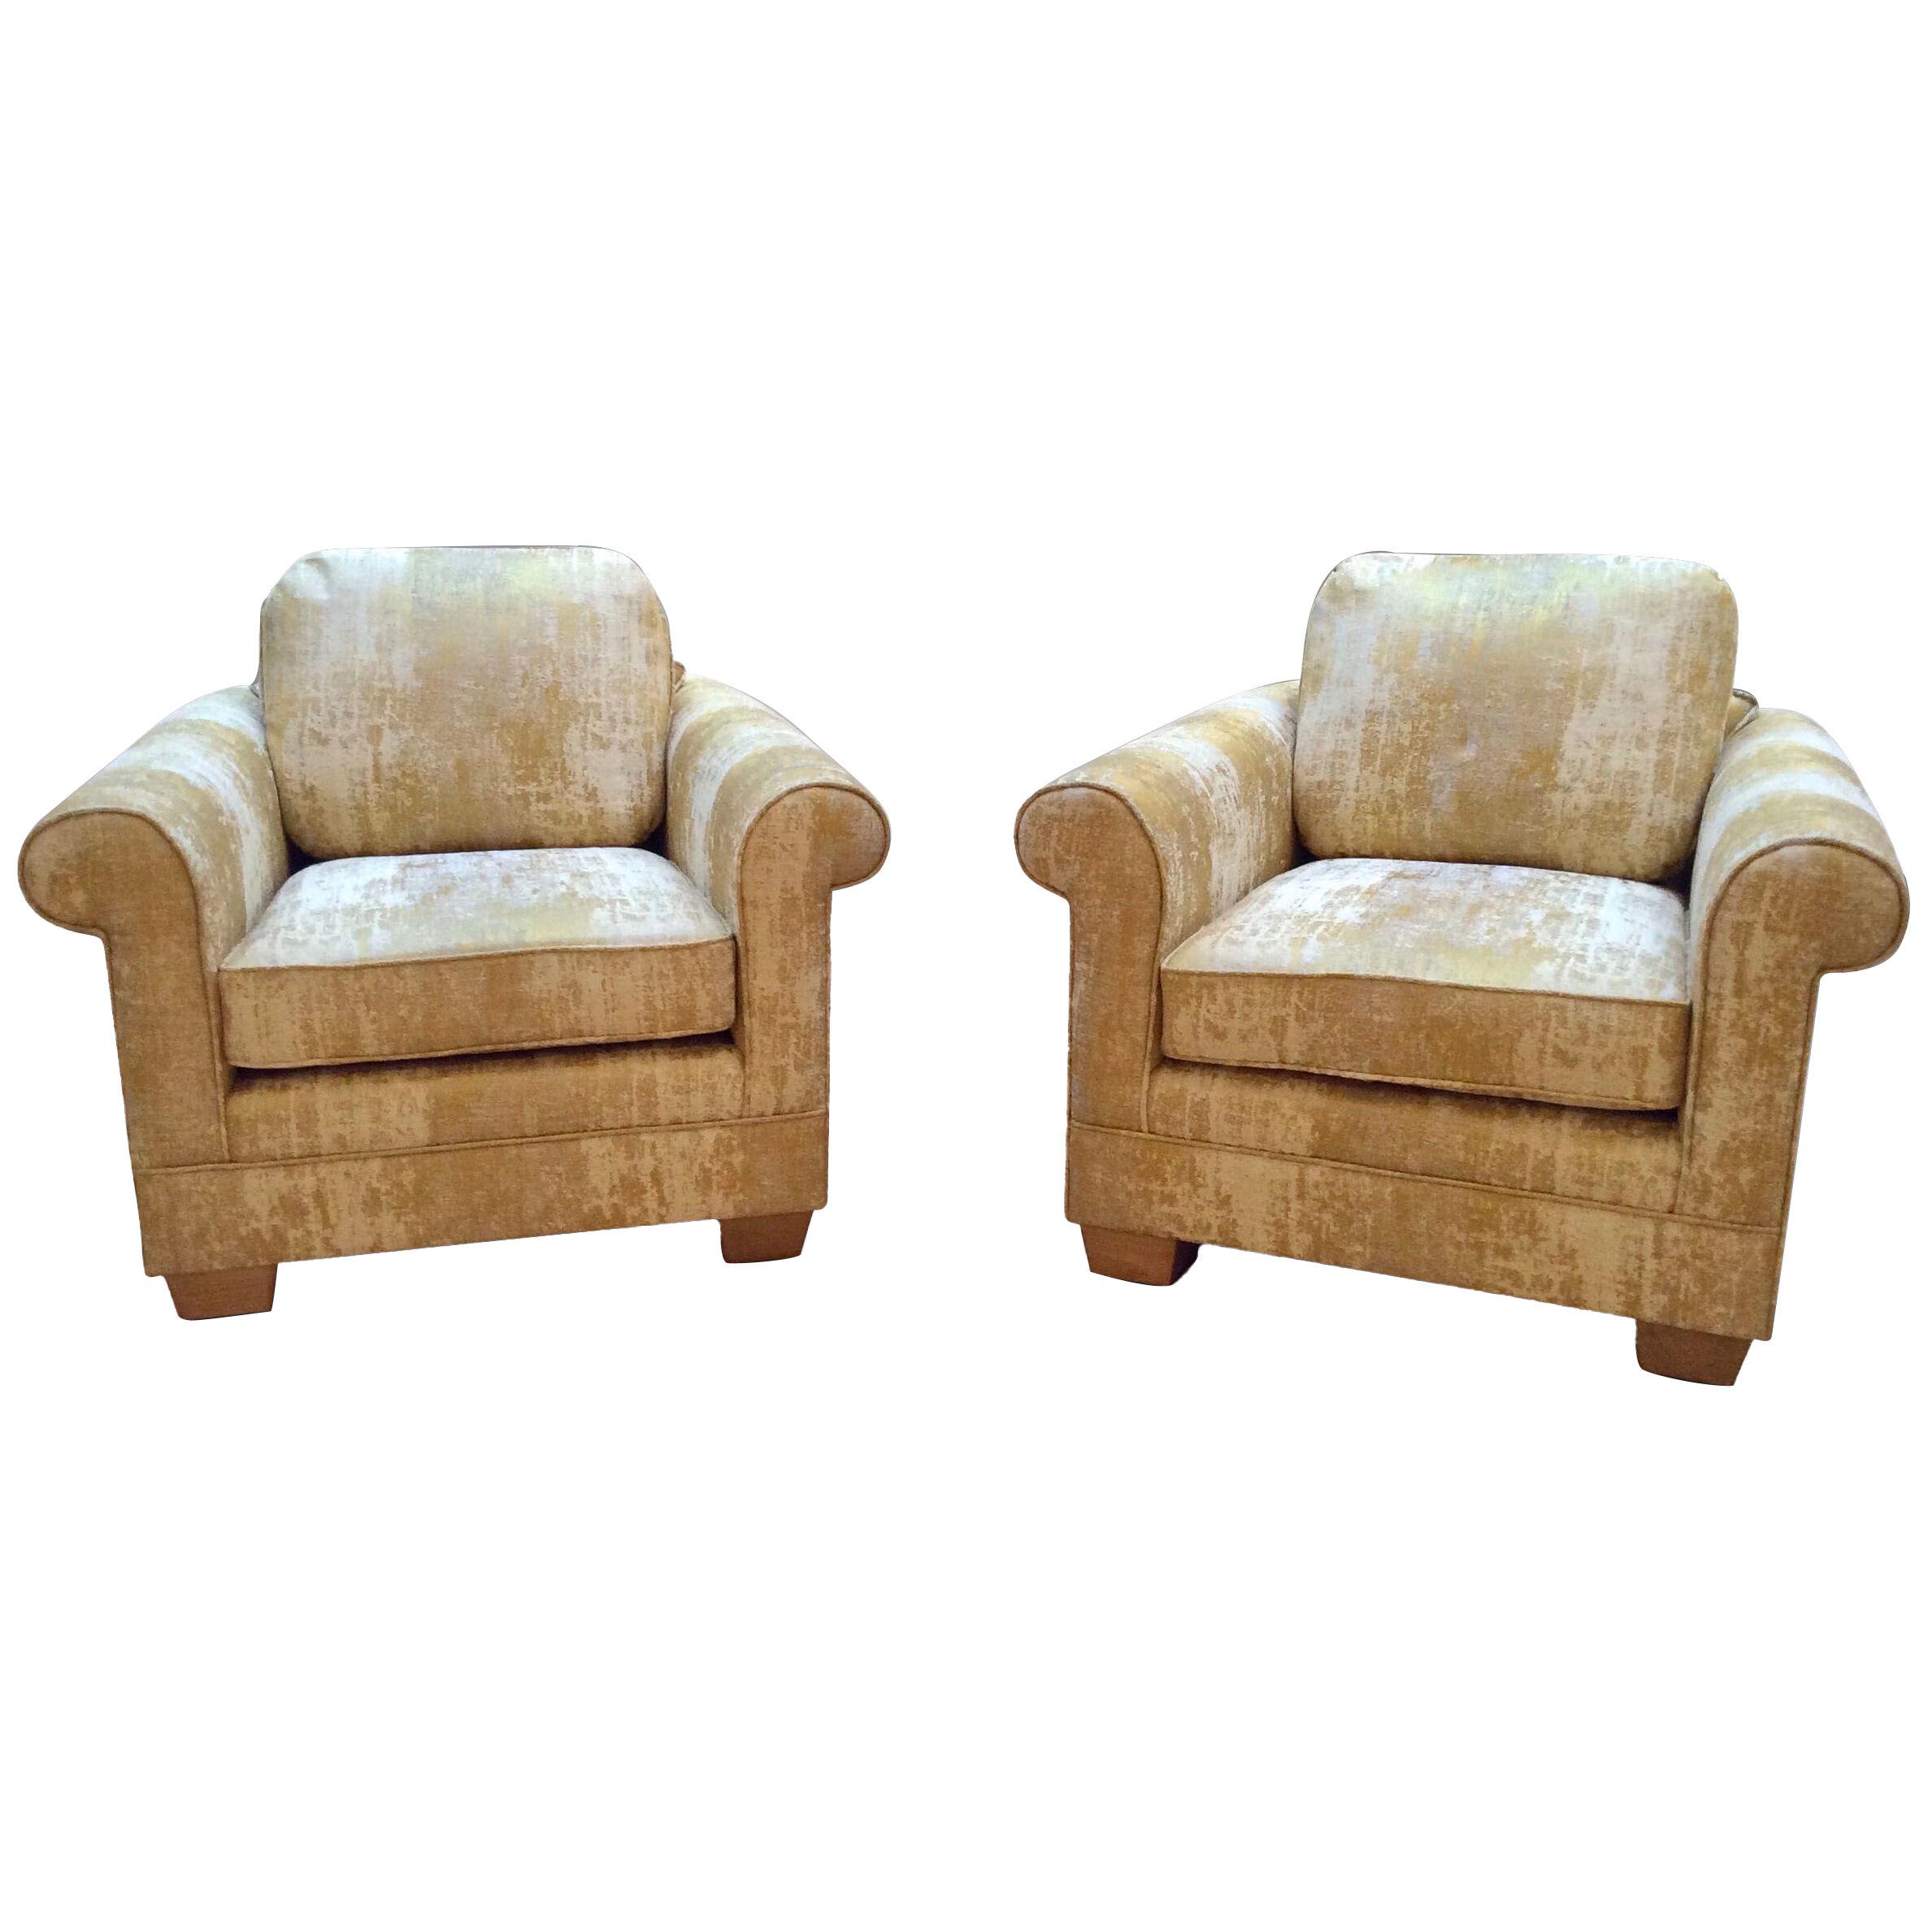 Pair of 1940s Armchairs